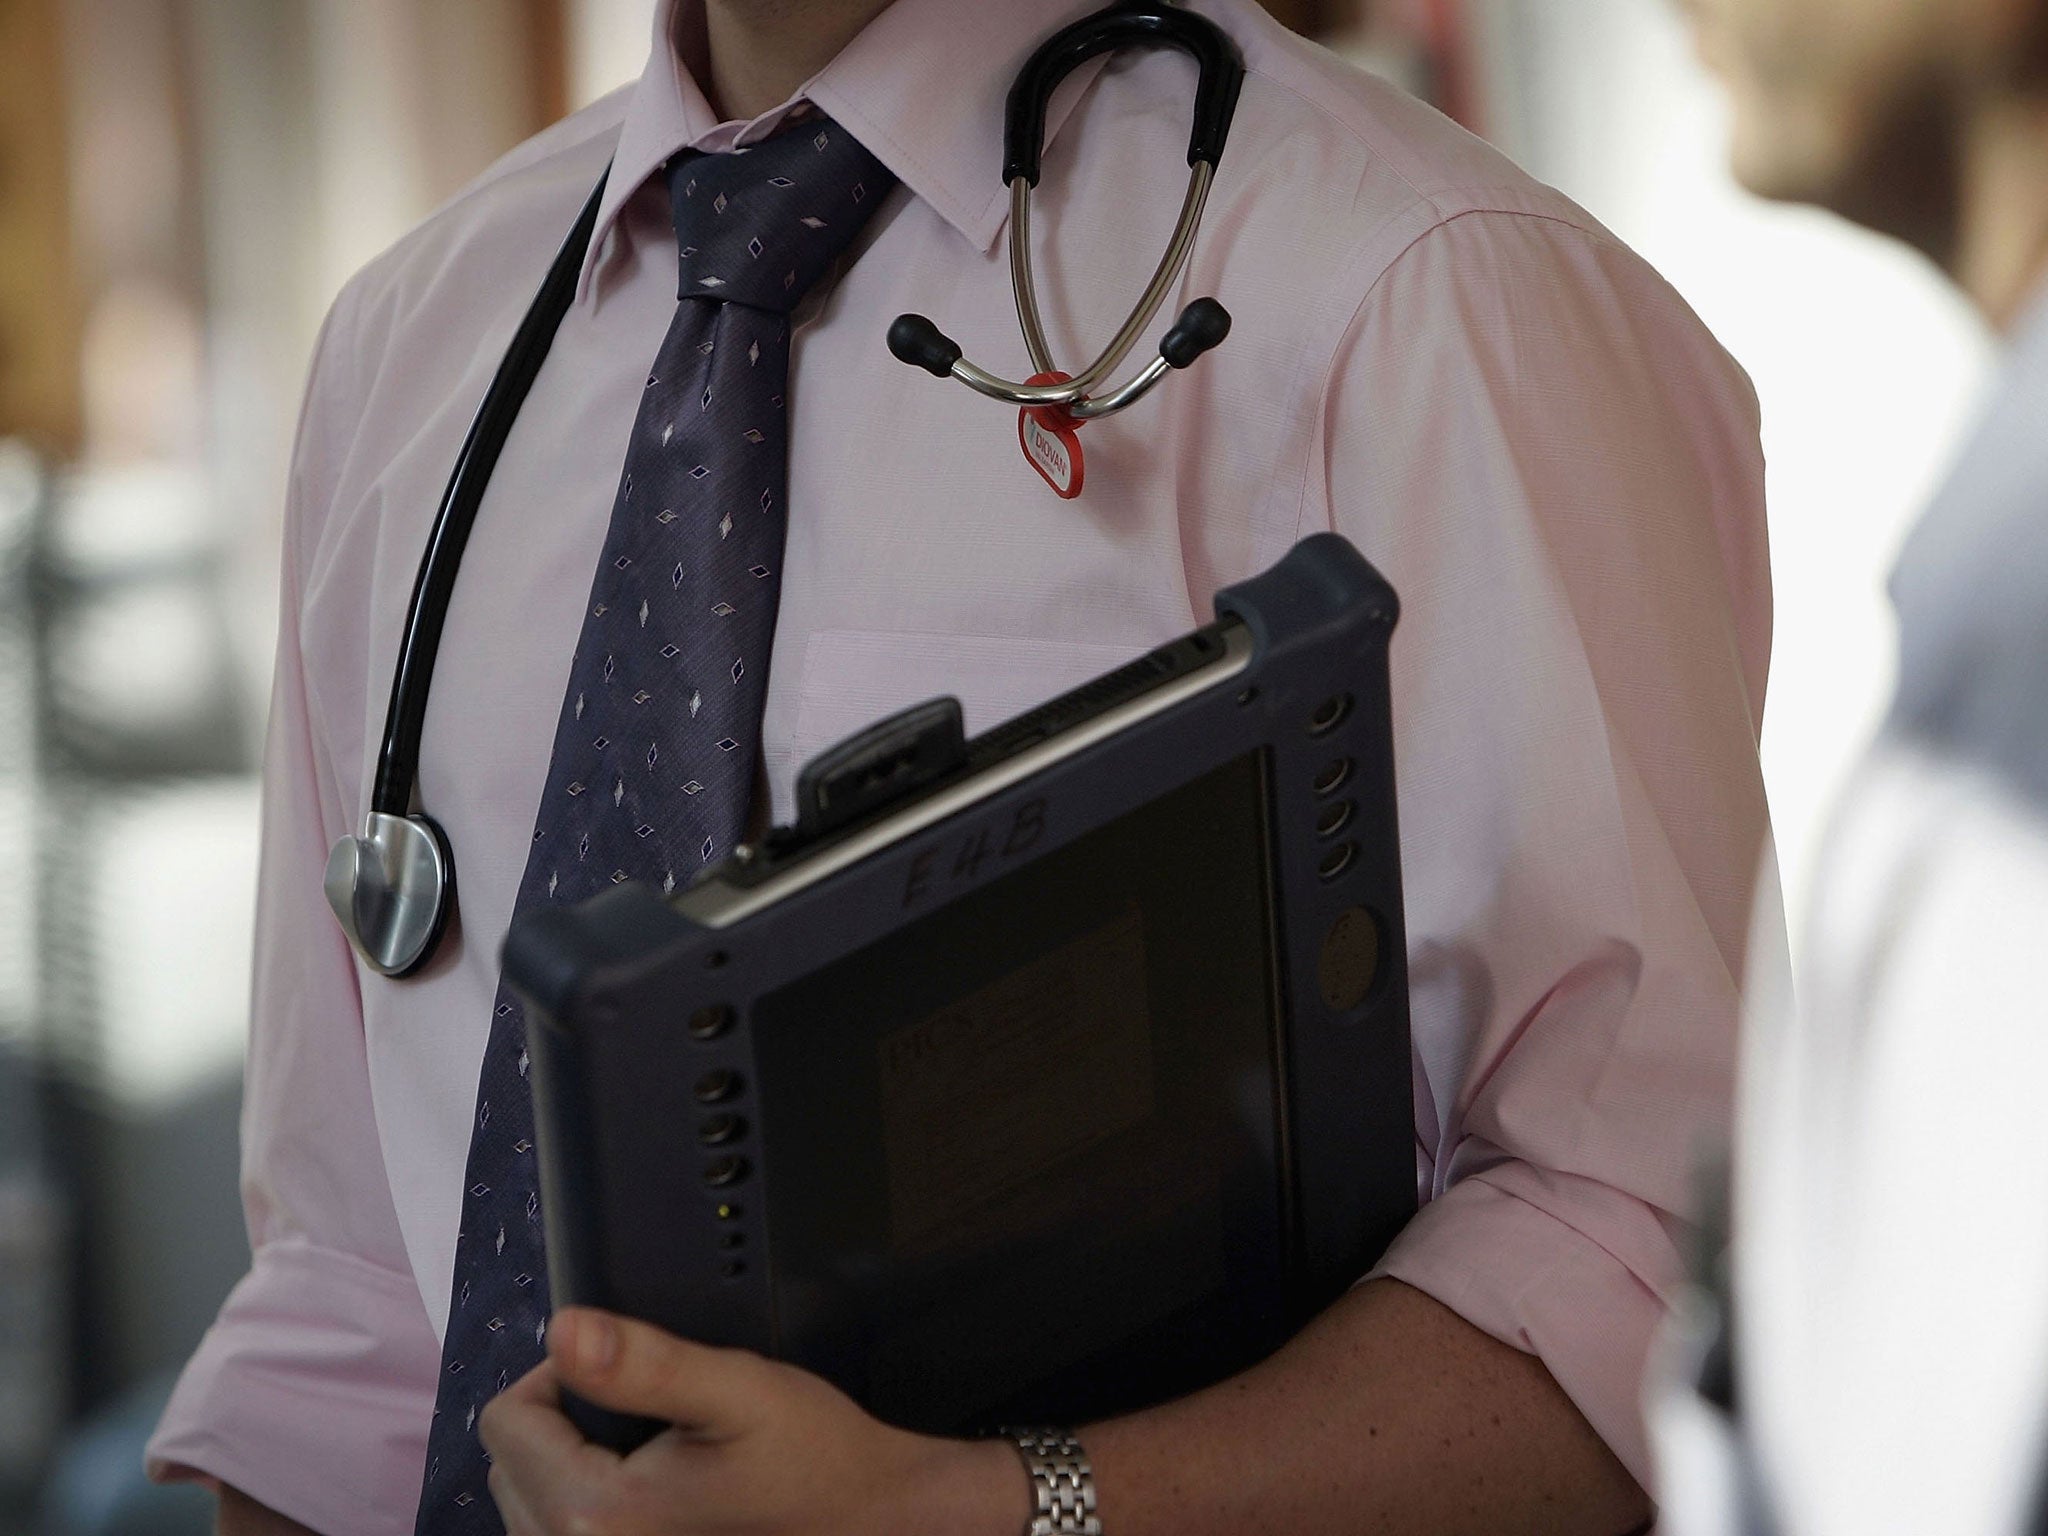 The Government’s decision to impose a new contract on junior doctors may risk an exodus of young medics, after figures revealed an unprecedented spike in NHS doctors registering to work overseas